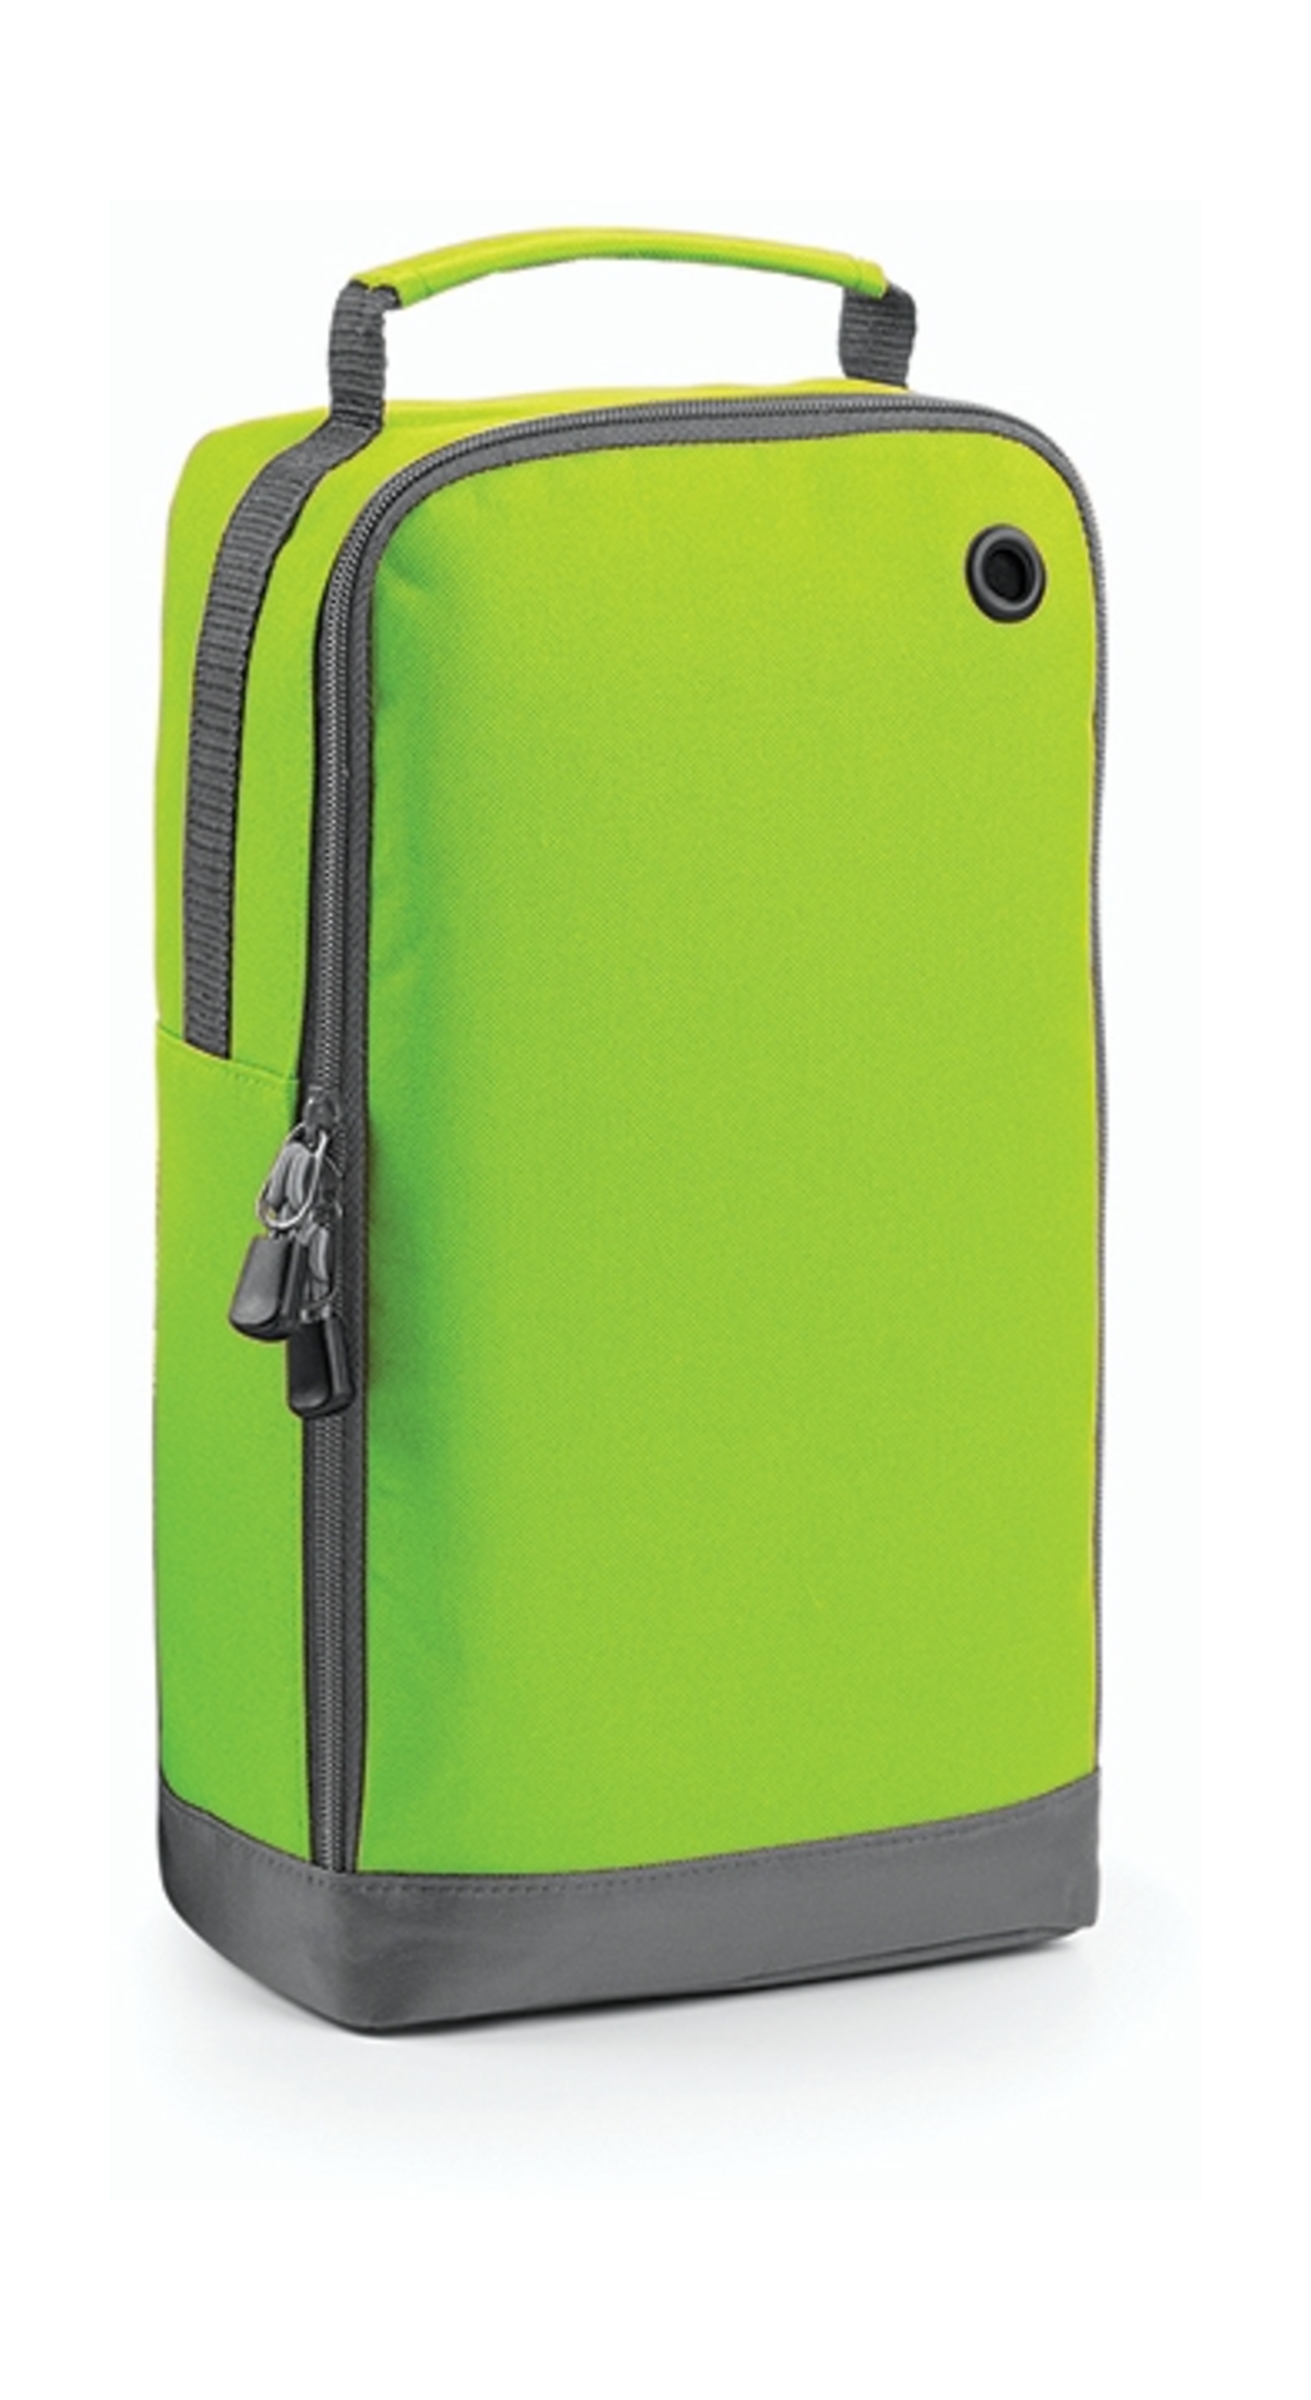 Bag Base Athleisure Sports Shoe/ Accessory Bag - Lime Green - One Size